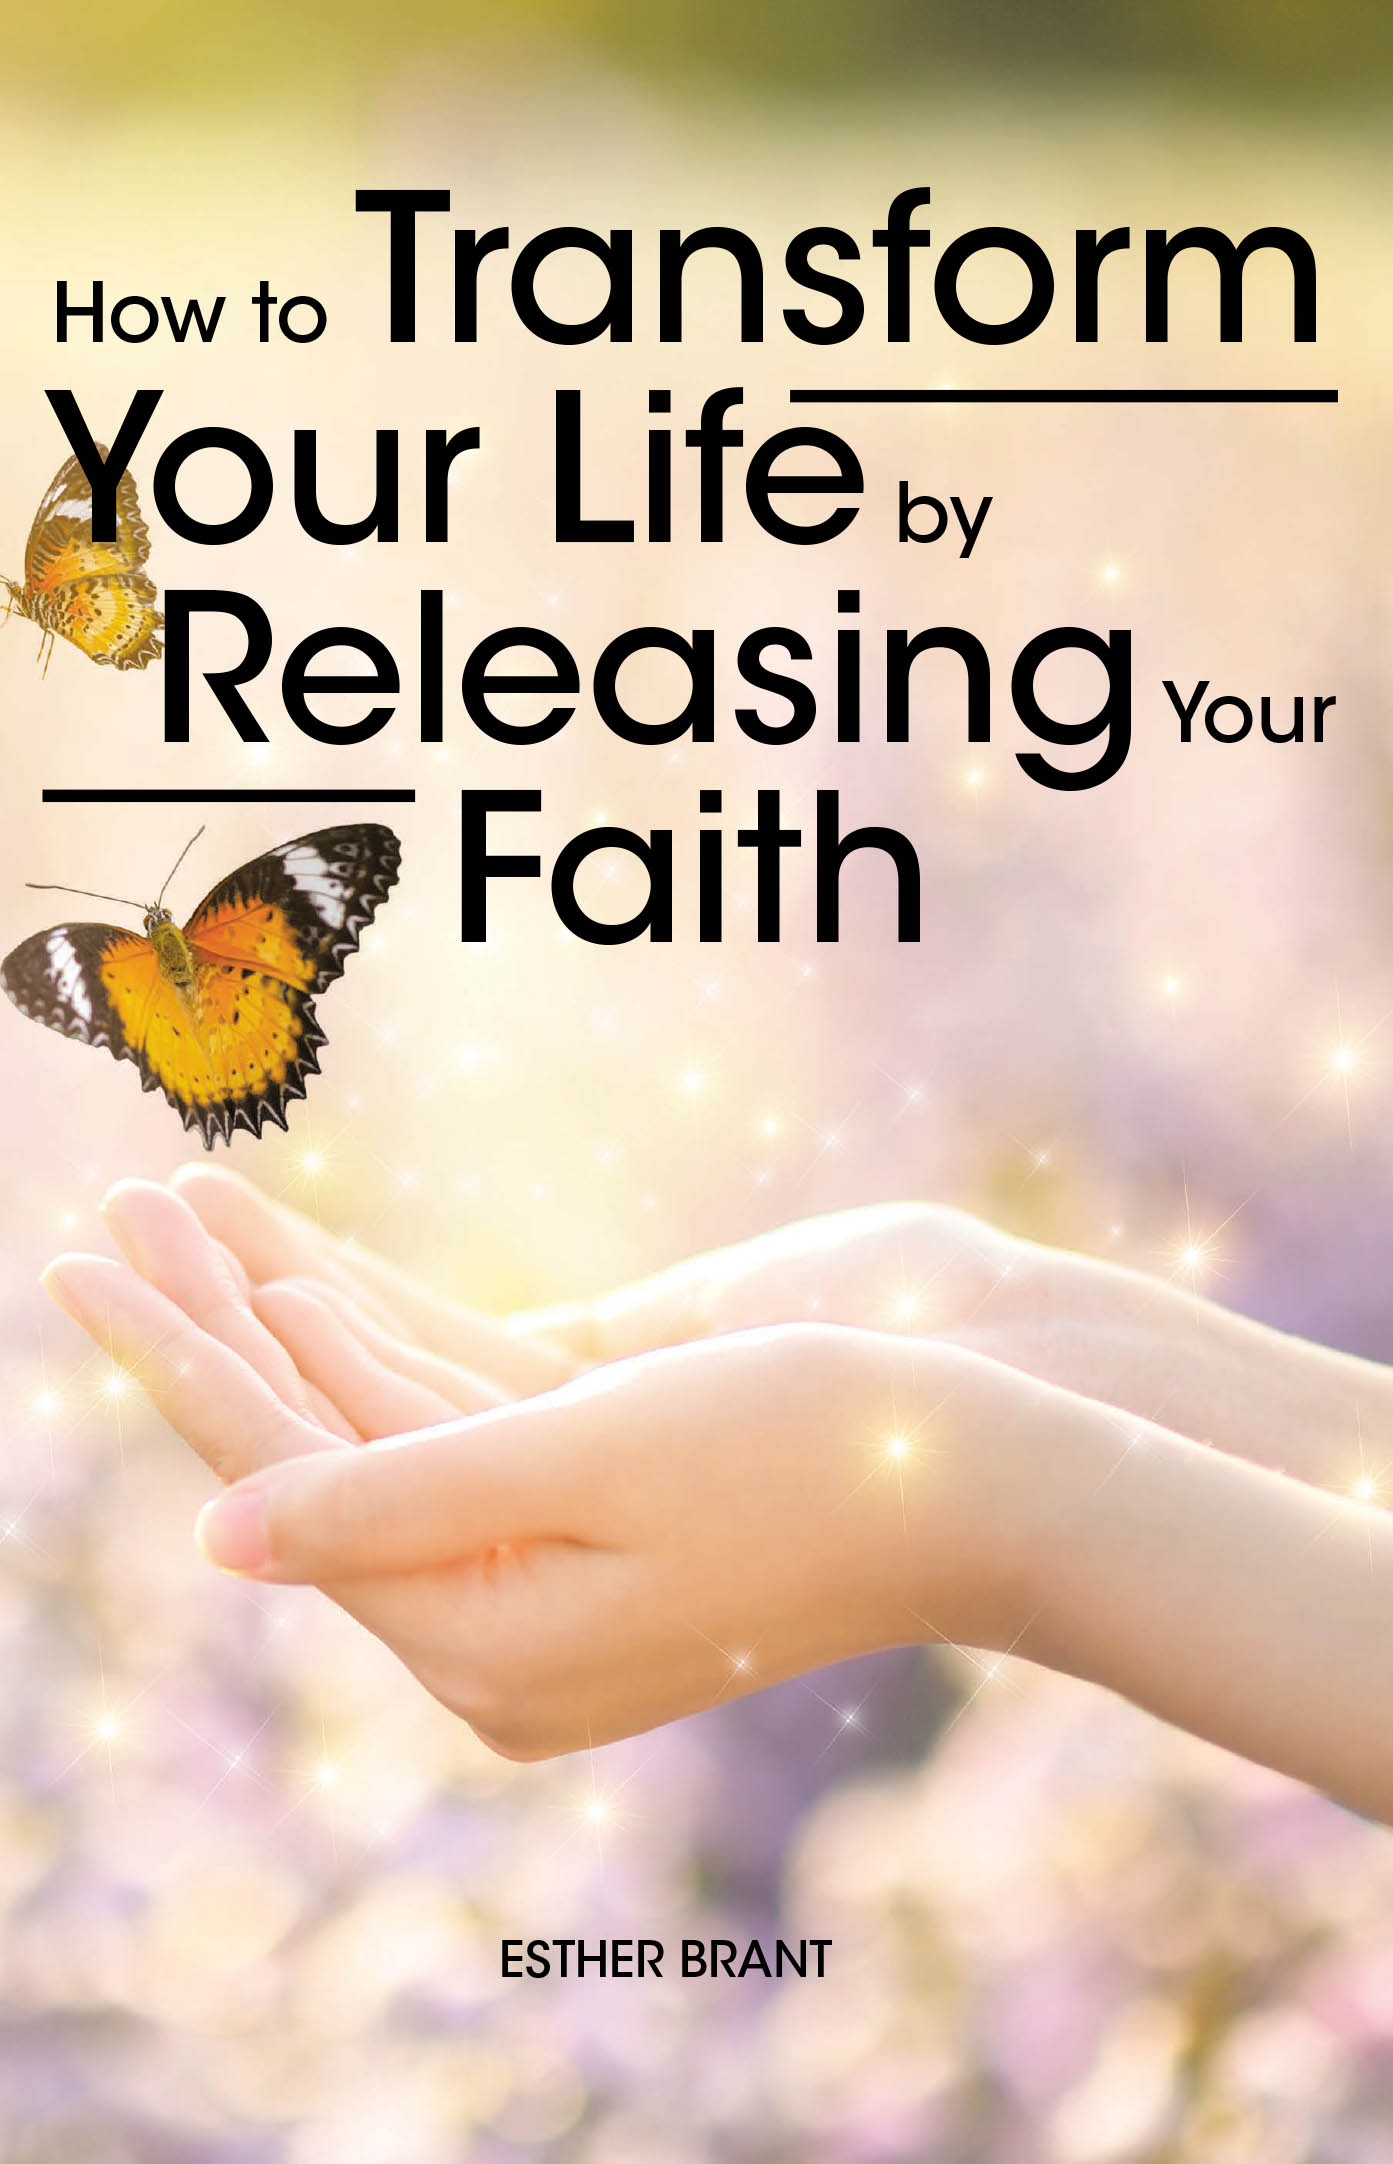 Esther Brant’s Newly Released “How to Transform Your Life by Releasing Your Faith” is an Uplifting Resource for Personal Empowerment in the Pursuit of Full Trust in God